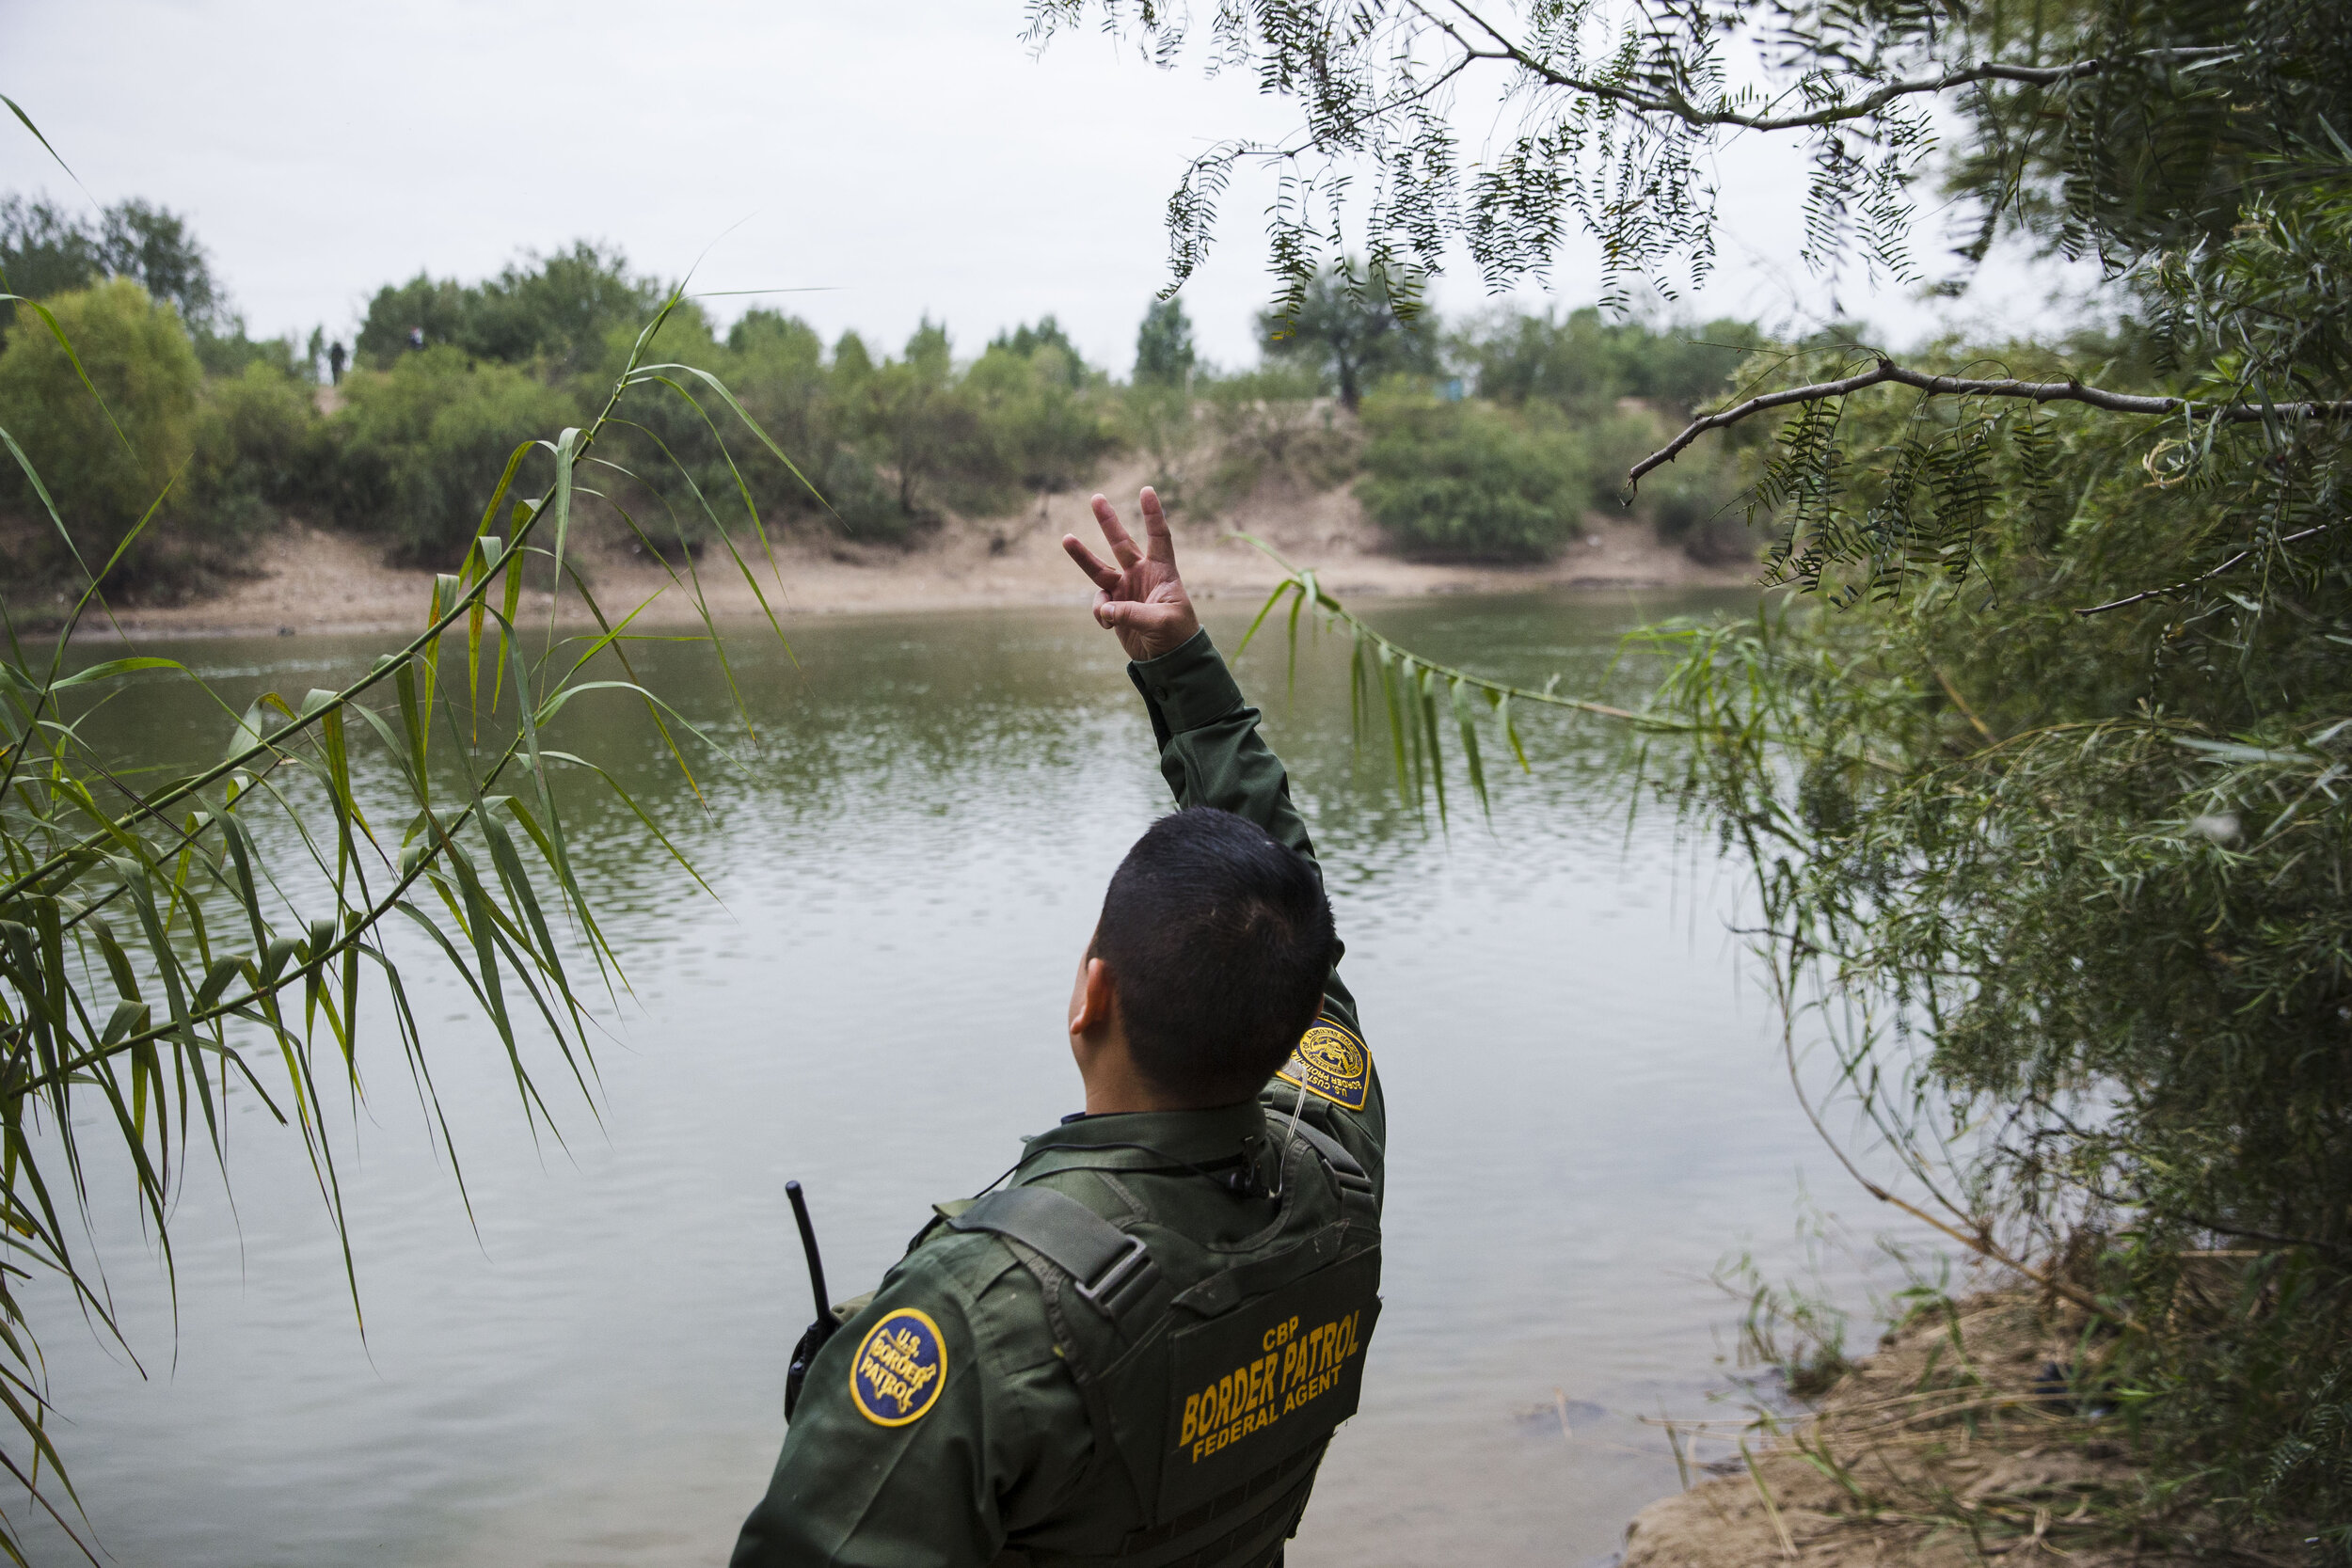  Border Patrol Agent Marcelino Medina signals across the Rio Grande River to the Mexican Military while patrolling for illegal border activity on Wednesday, Dec. 5, 2018, near McAllen, TX. 